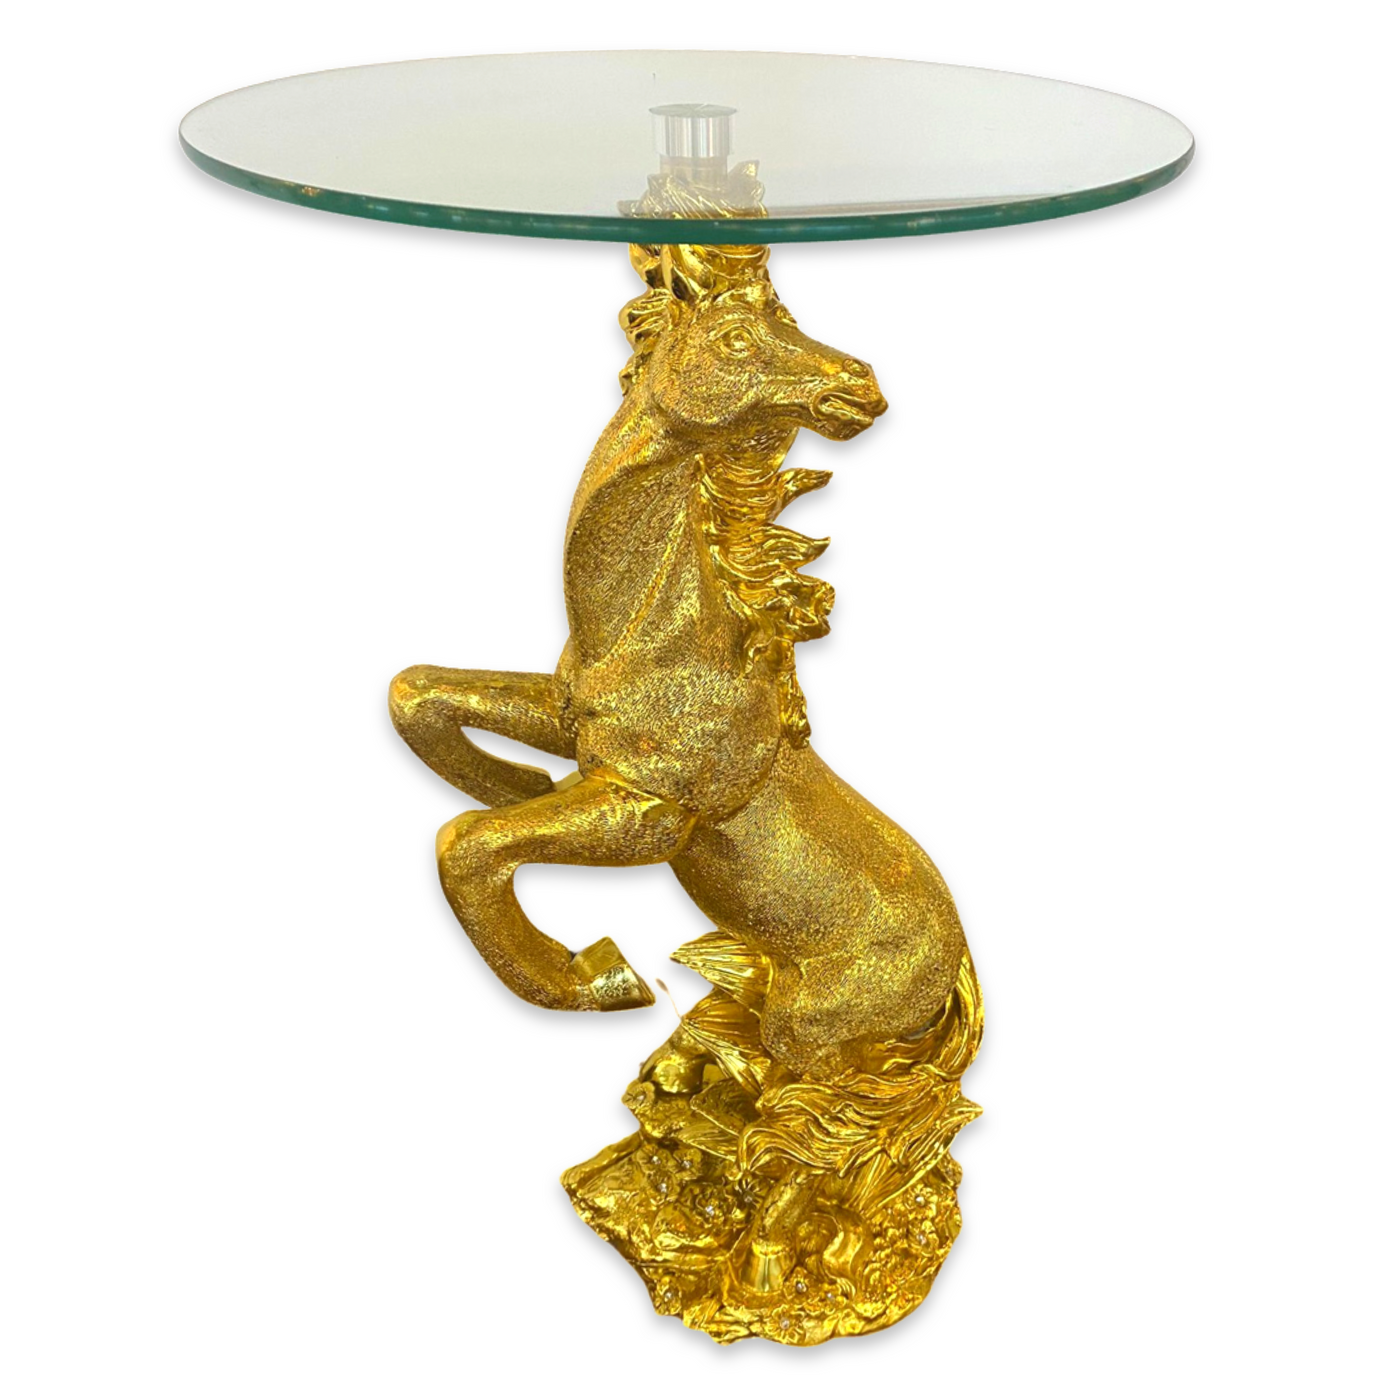 Horse Lamp Table